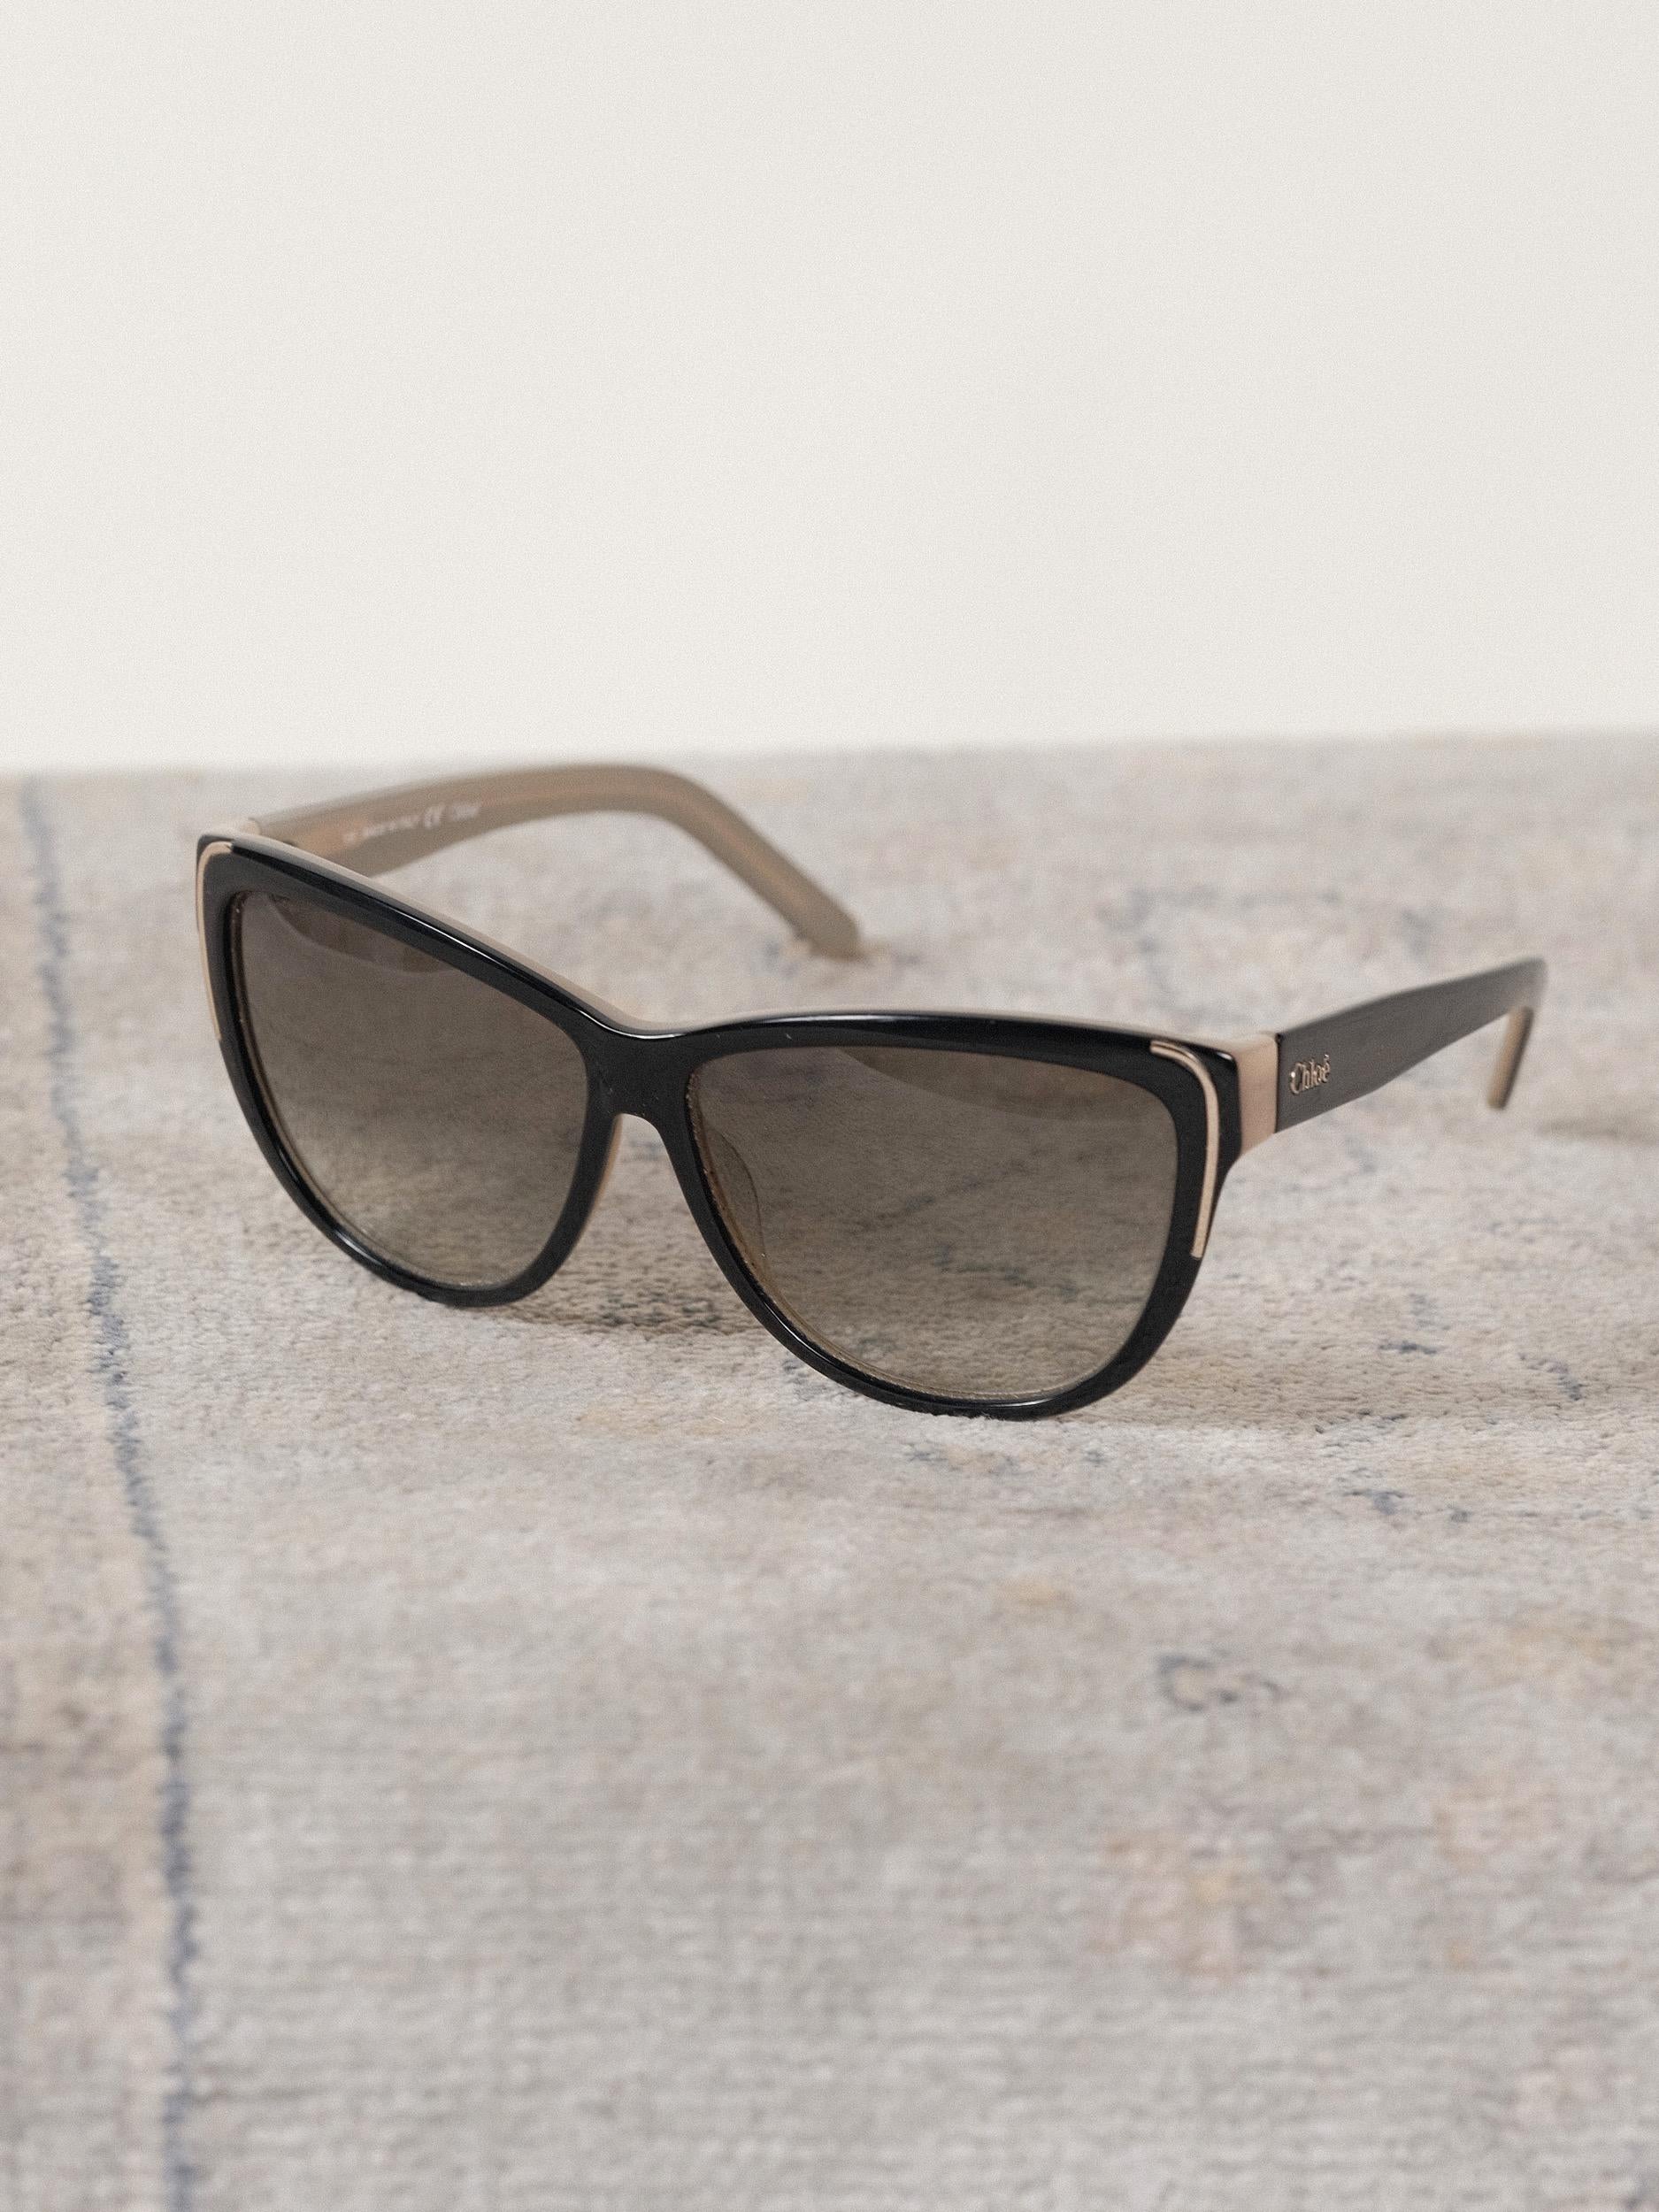 Chloé Sunglasses
Cat Eye, Greenish Neutral Gradient Lens 
Circa 2000's
Black and Taupe with Gold Detail
Signature logo on arm 
14cm/5.5in across (temple to temple)
Height- 5cm/2in
Eye Size - 59mm
Includes Original Case 